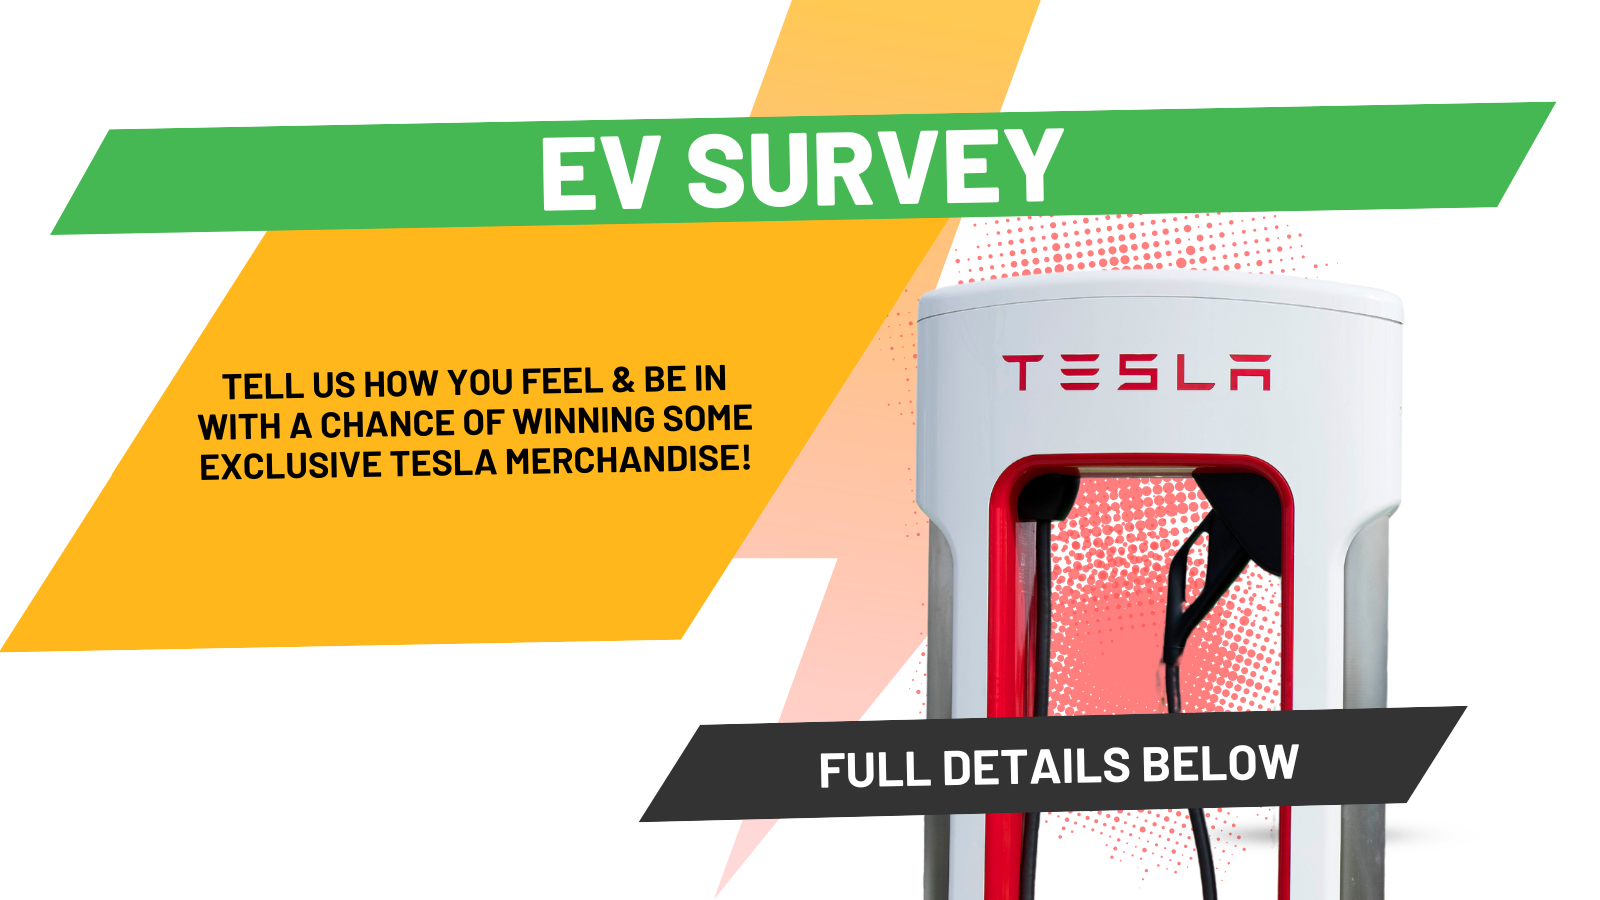 Moto - EV Survey - Terms and conditions